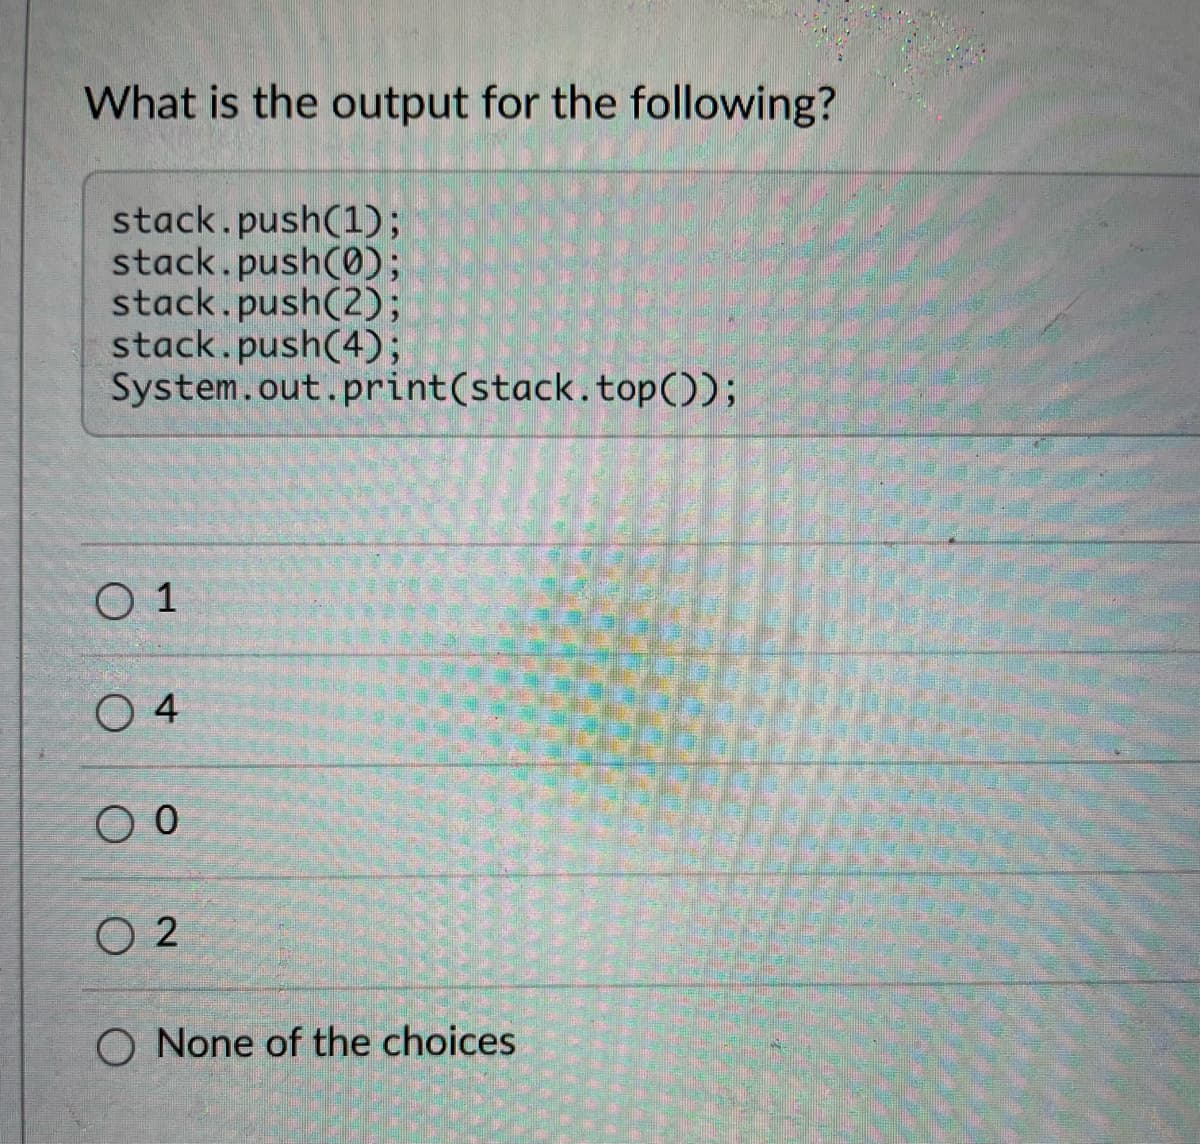 What is the output for the following?
stack.push(1);
stack.push(0);
stack.push(2);
stack.push(4);
System.out.print(stack.top();
O 1
O 4
O 2
O None of the choices
